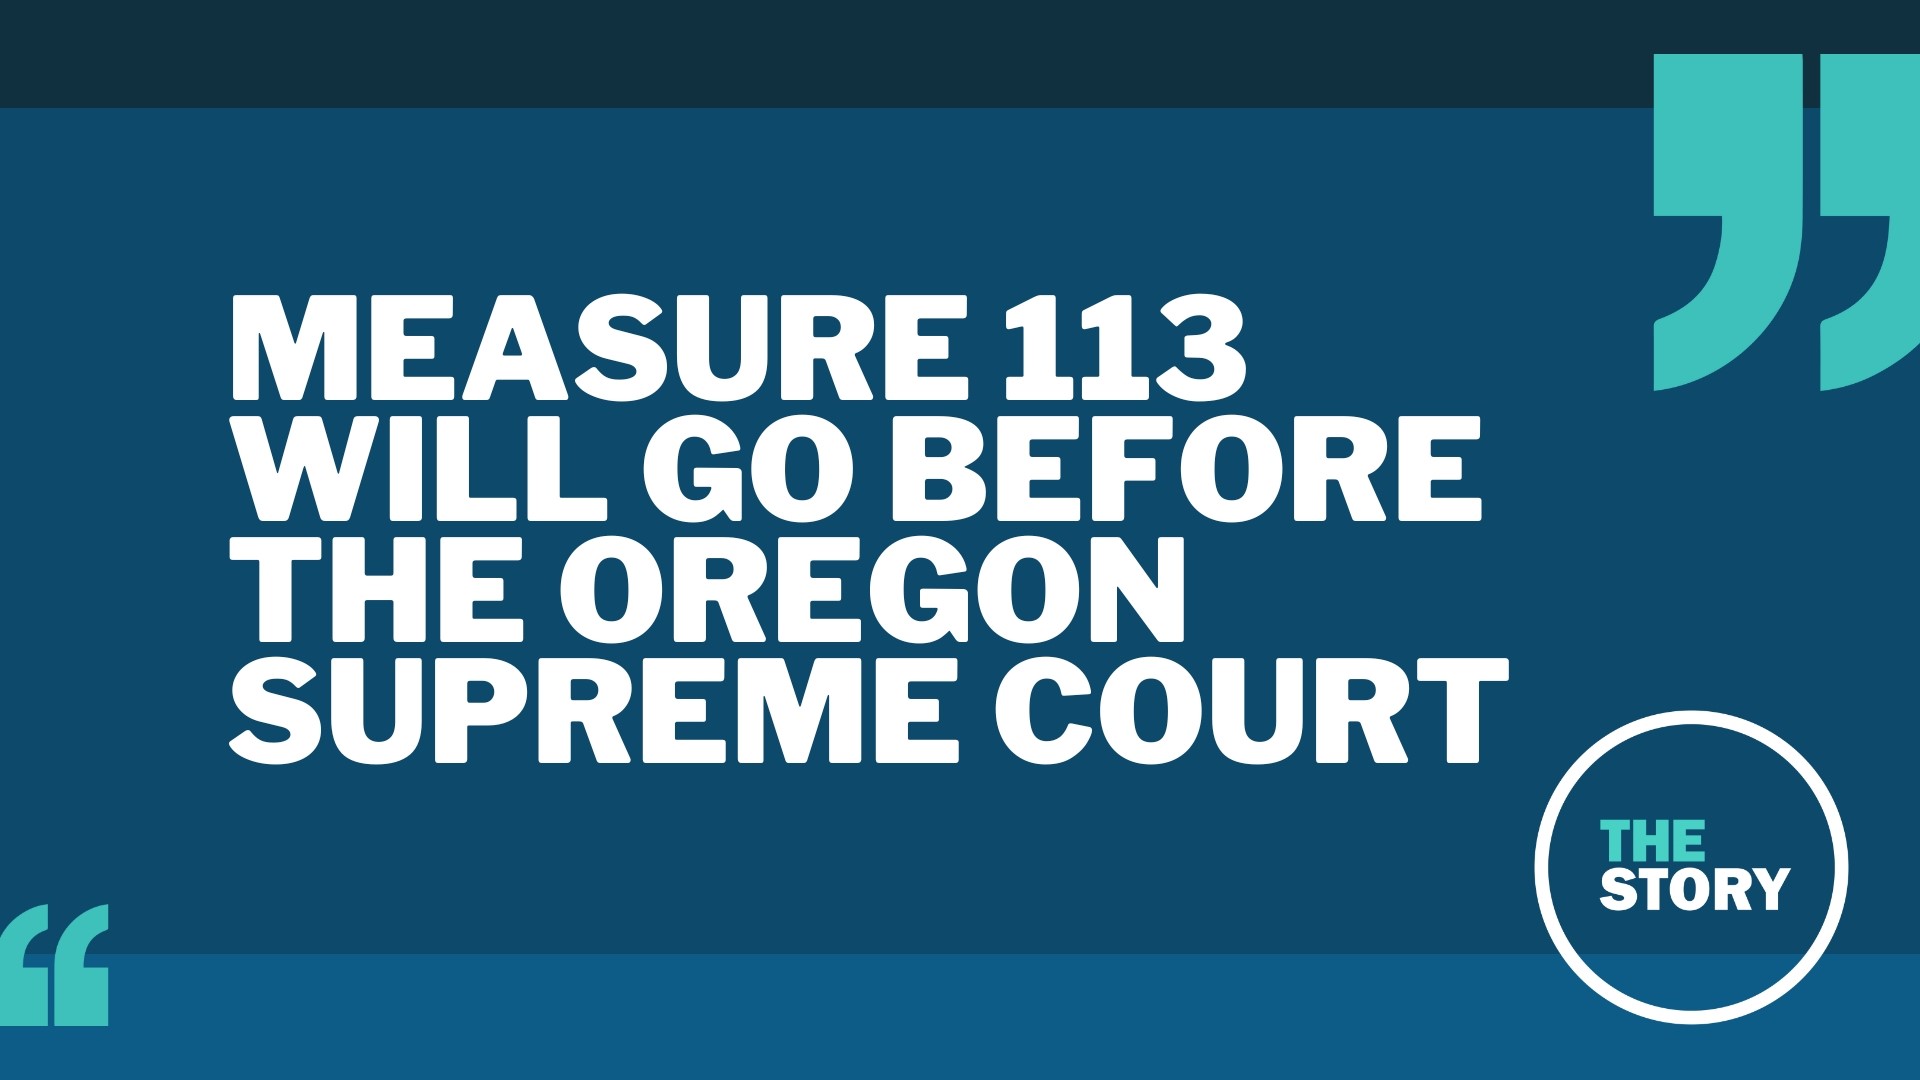 Oregonians overwhelmingly supported Measure 113, which was meant to prevent legislative walkouts. Republicans have challenged it in court.